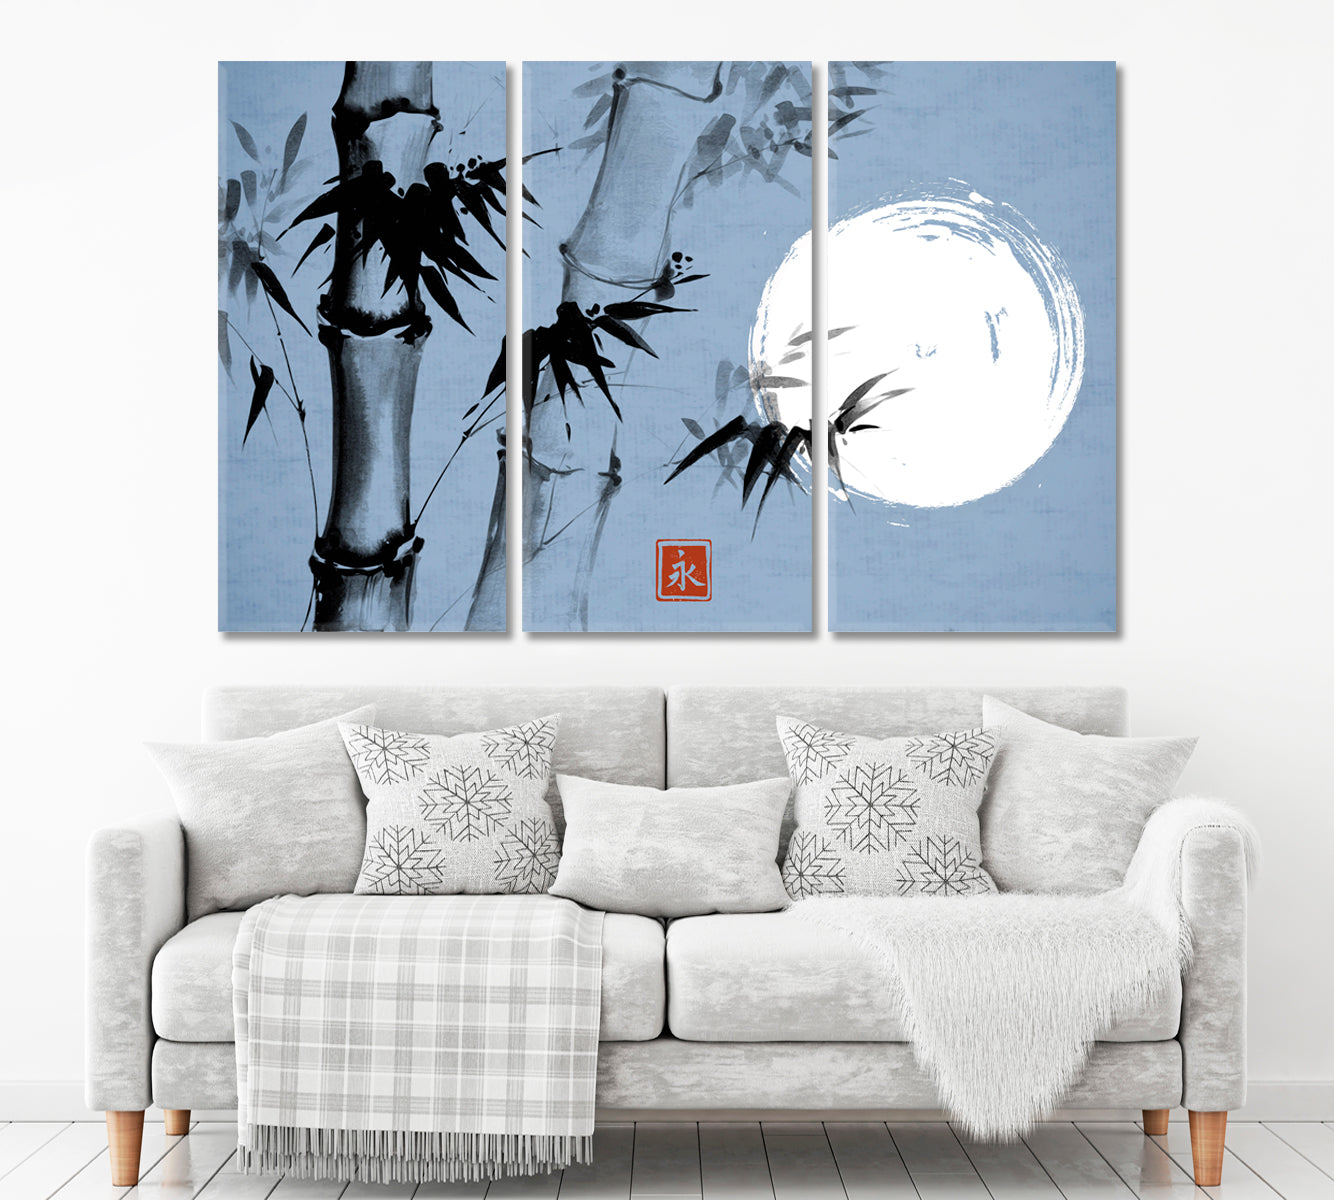 ETERNITY Sumi-e Hieroglyph Bamboo Moon Traditional Japanese Ink Canvas Print Blue Color Asian Style Canvas Print Wall Art Artesty 3 panels 36" x 24" 